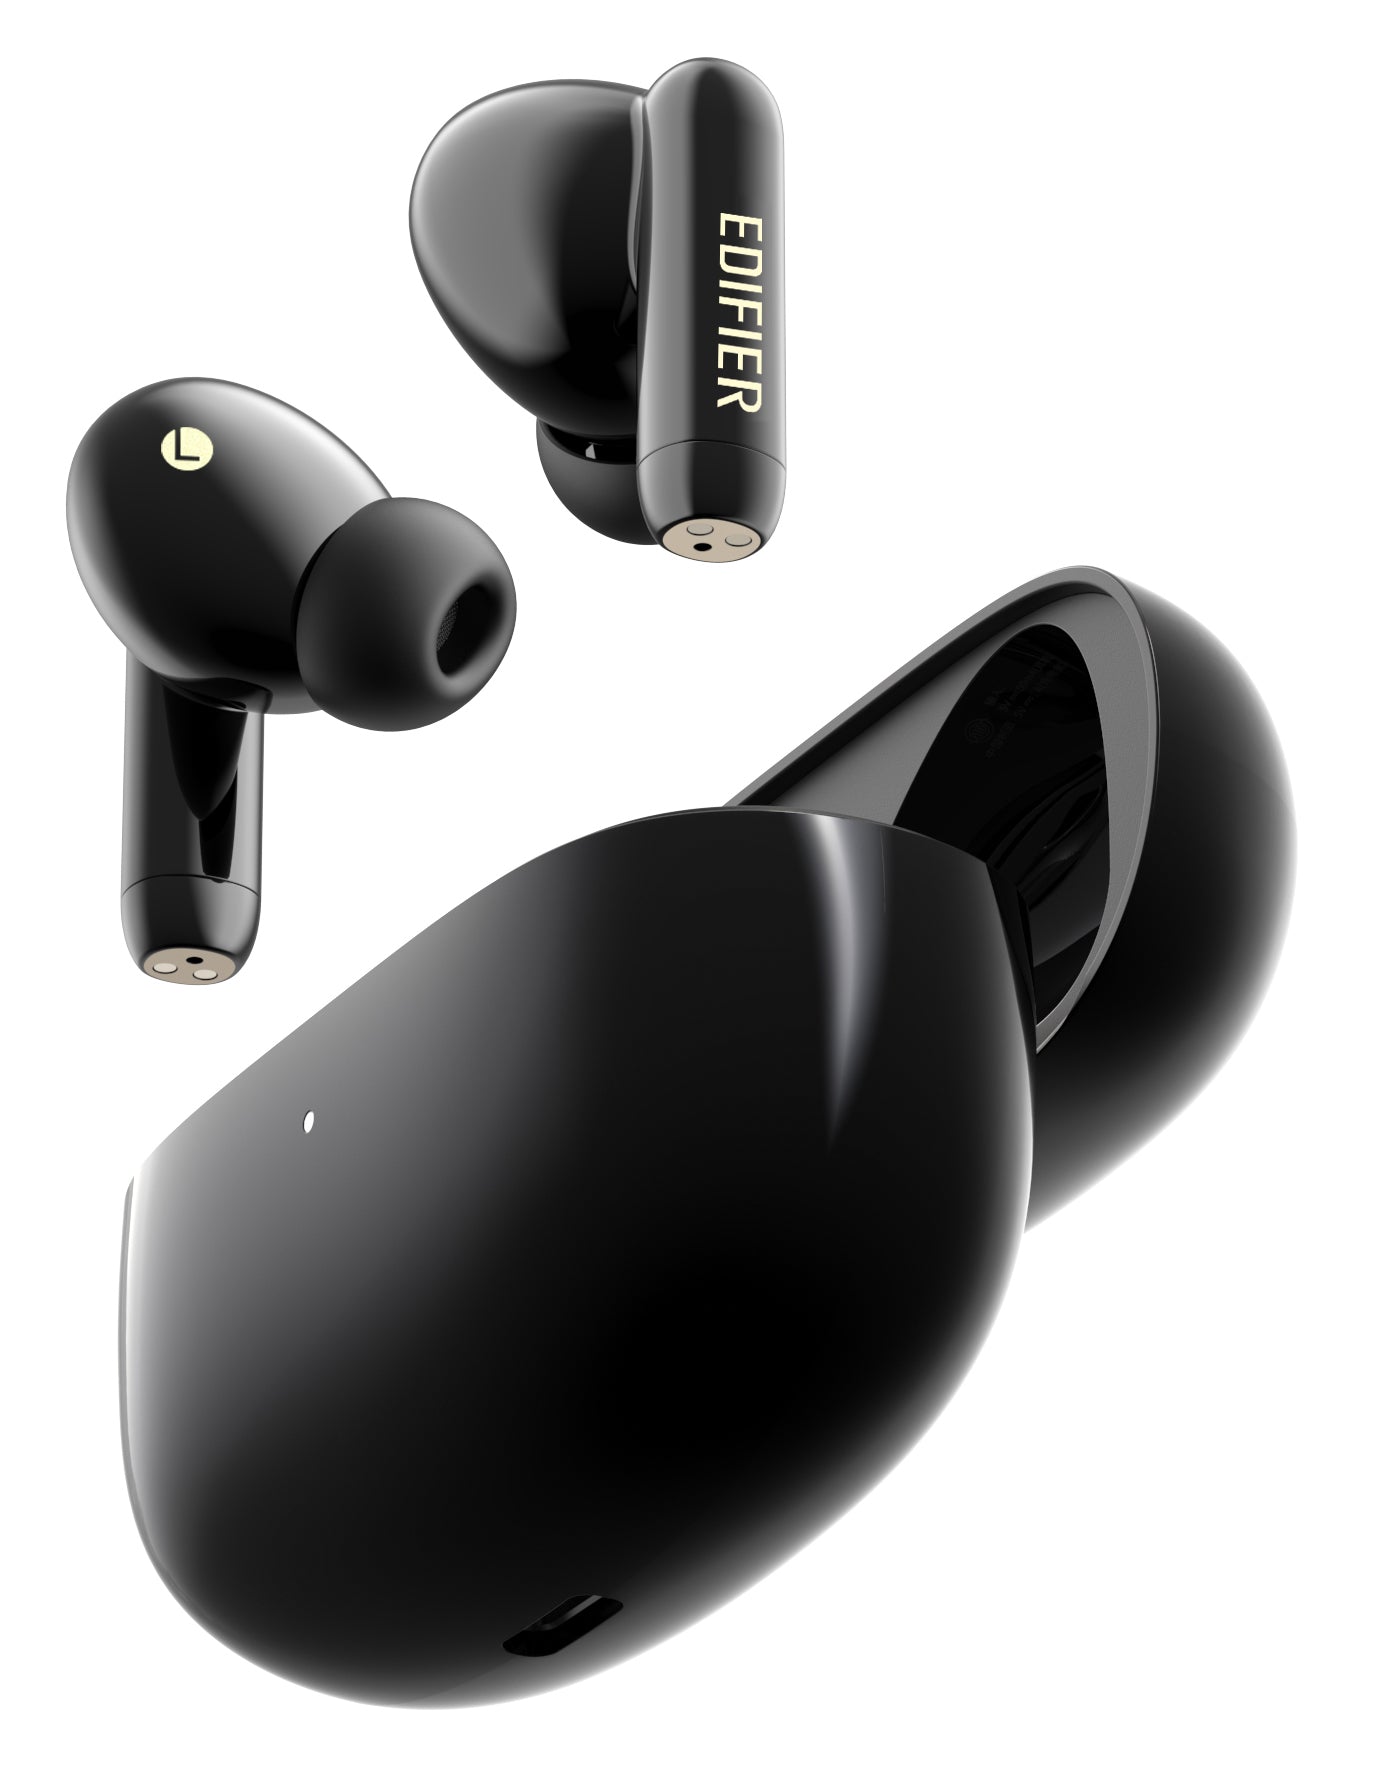 Edifier TWS330 NB True Wireless Stereo Earbuds With Active Noise Cancellation - Black